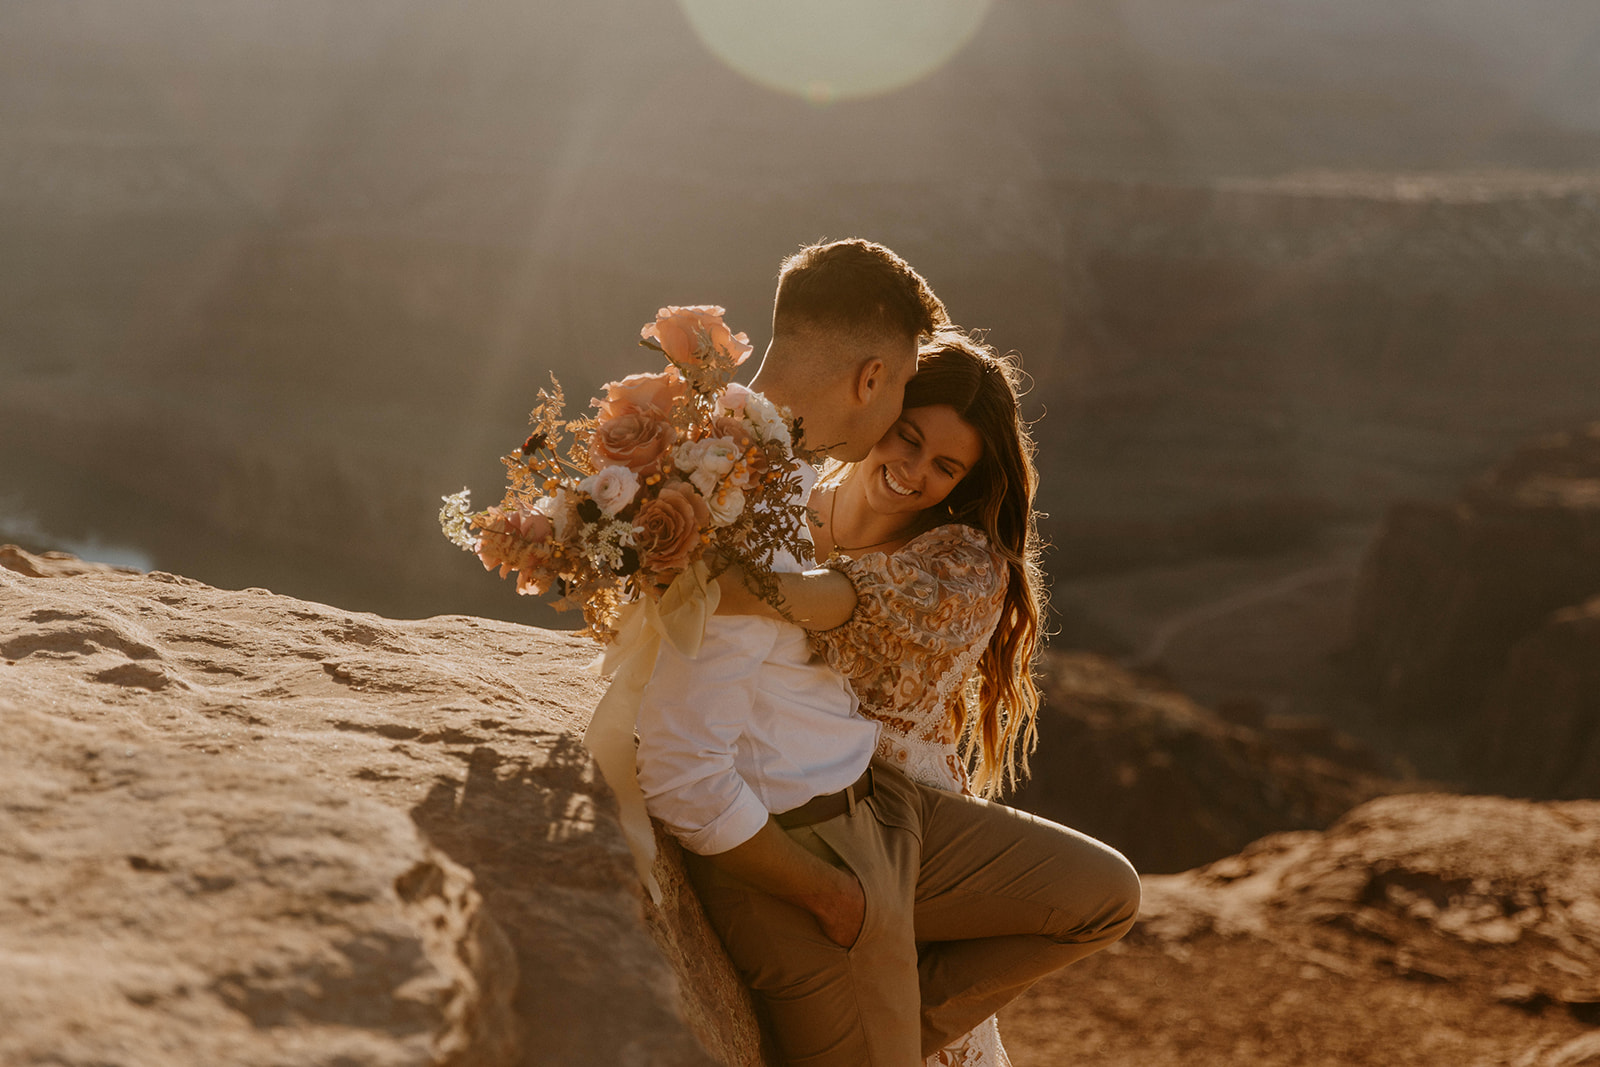 A couple sits on a rock at sunset, with the man holding a bouquet of flowers and the woman leaning against him - must have wedding poses